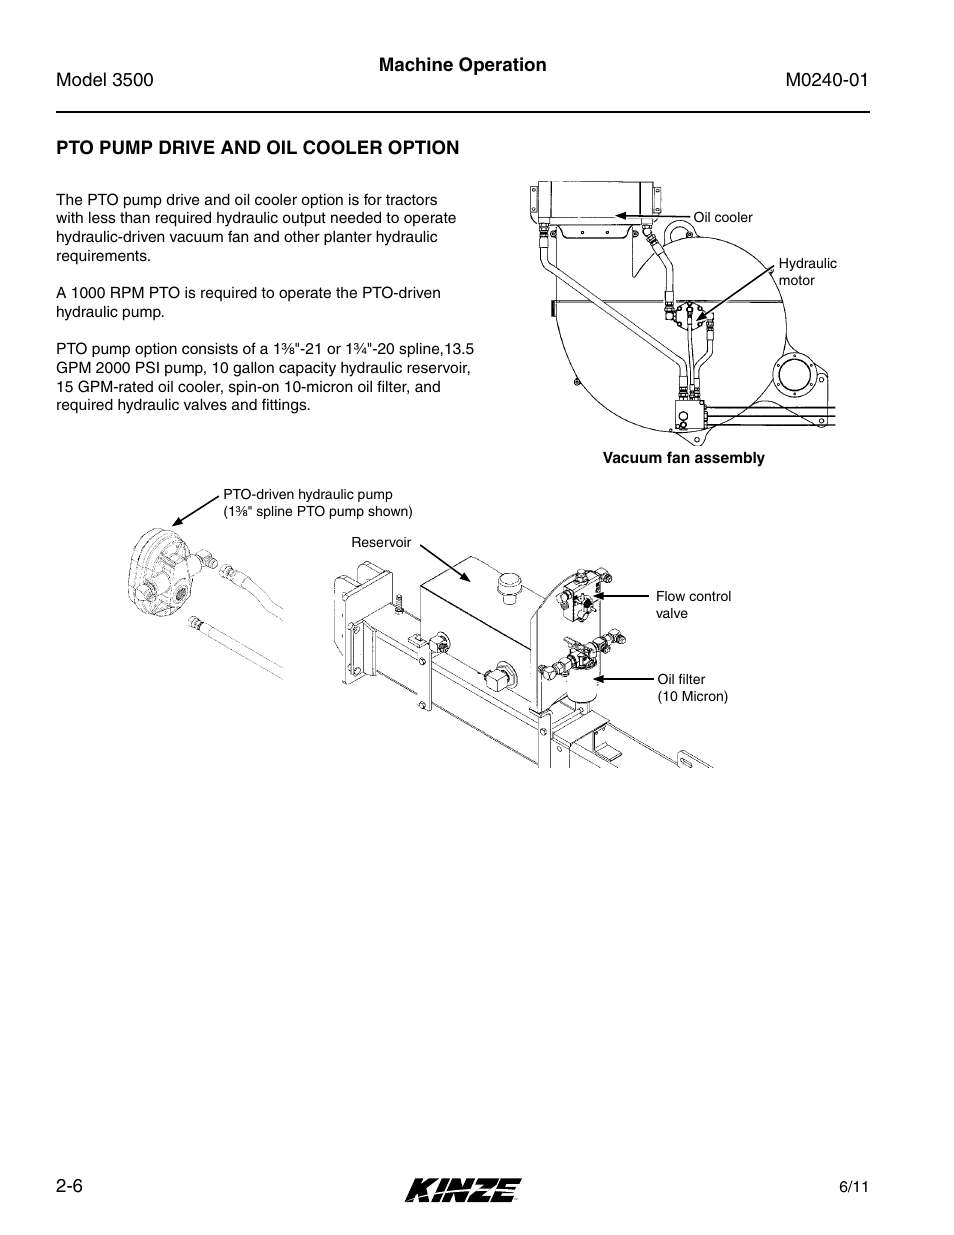 Pto pump drive and oil cooler option, Pto pump drive and oil cooler option -6 | Kinze 3500 Lift and Rotate Planter Rev. 7/14 User Manual | Page 18 / 140